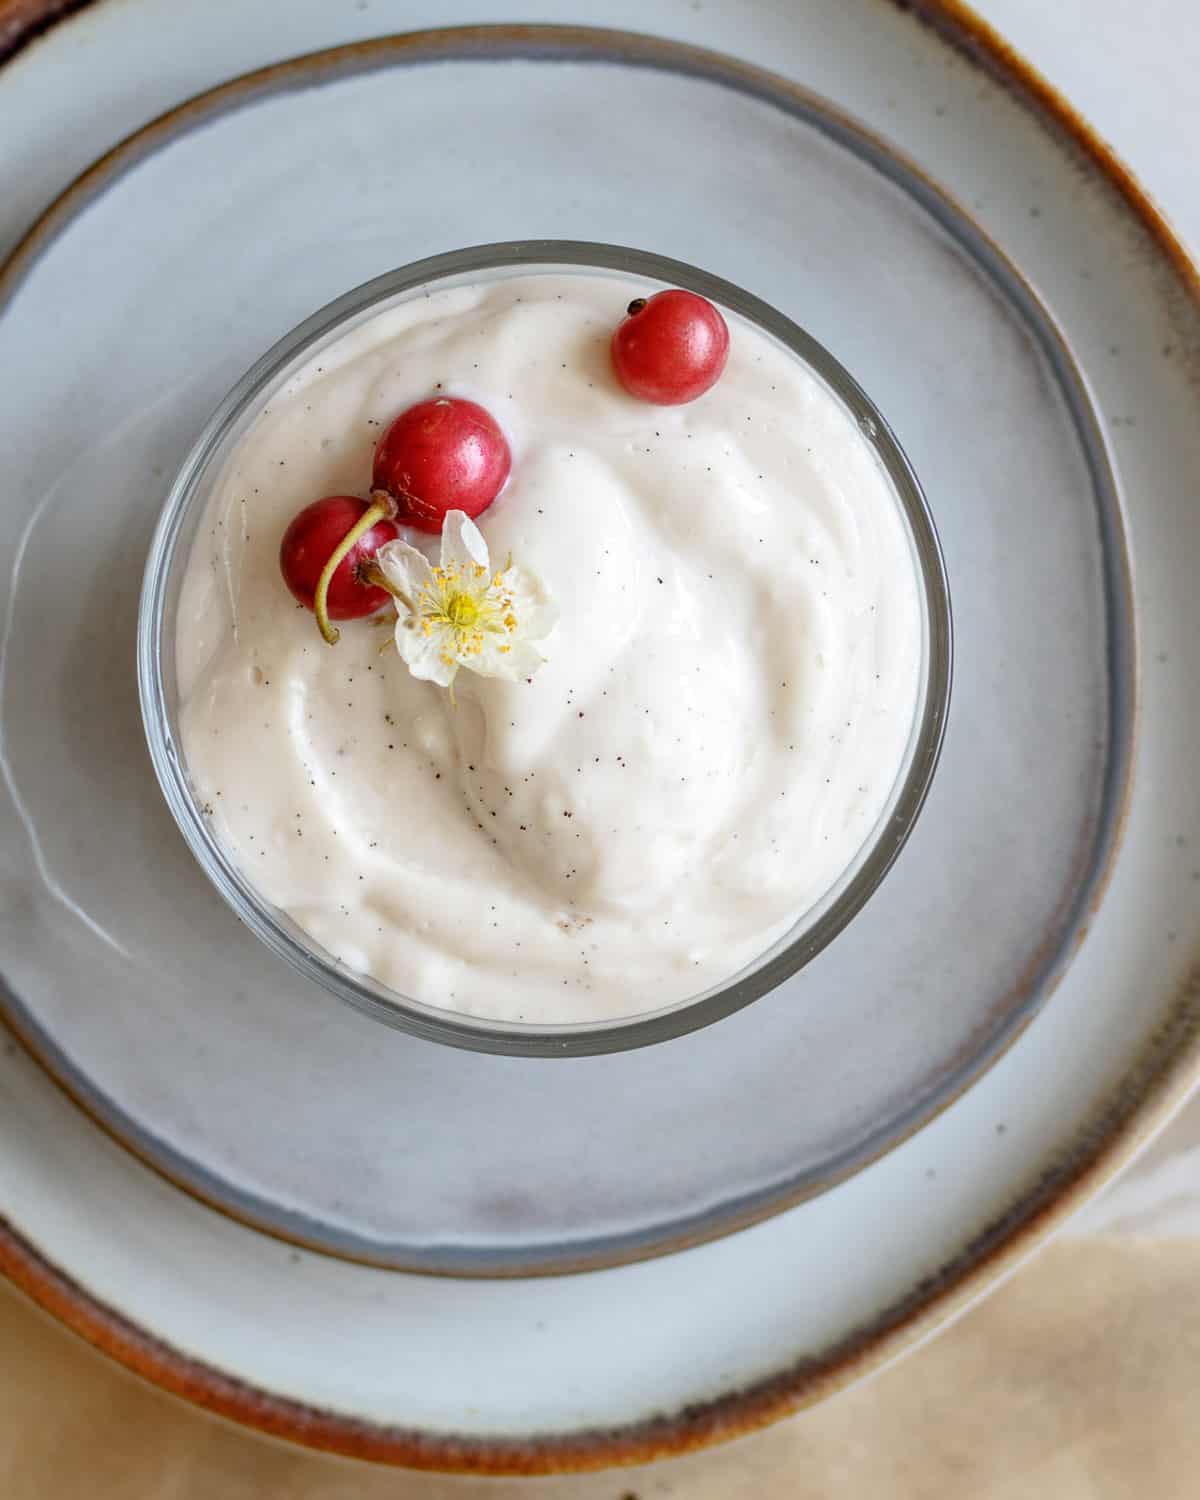 Bowl of creamy vegan vanilla pudding decorated with three berries and a flower.